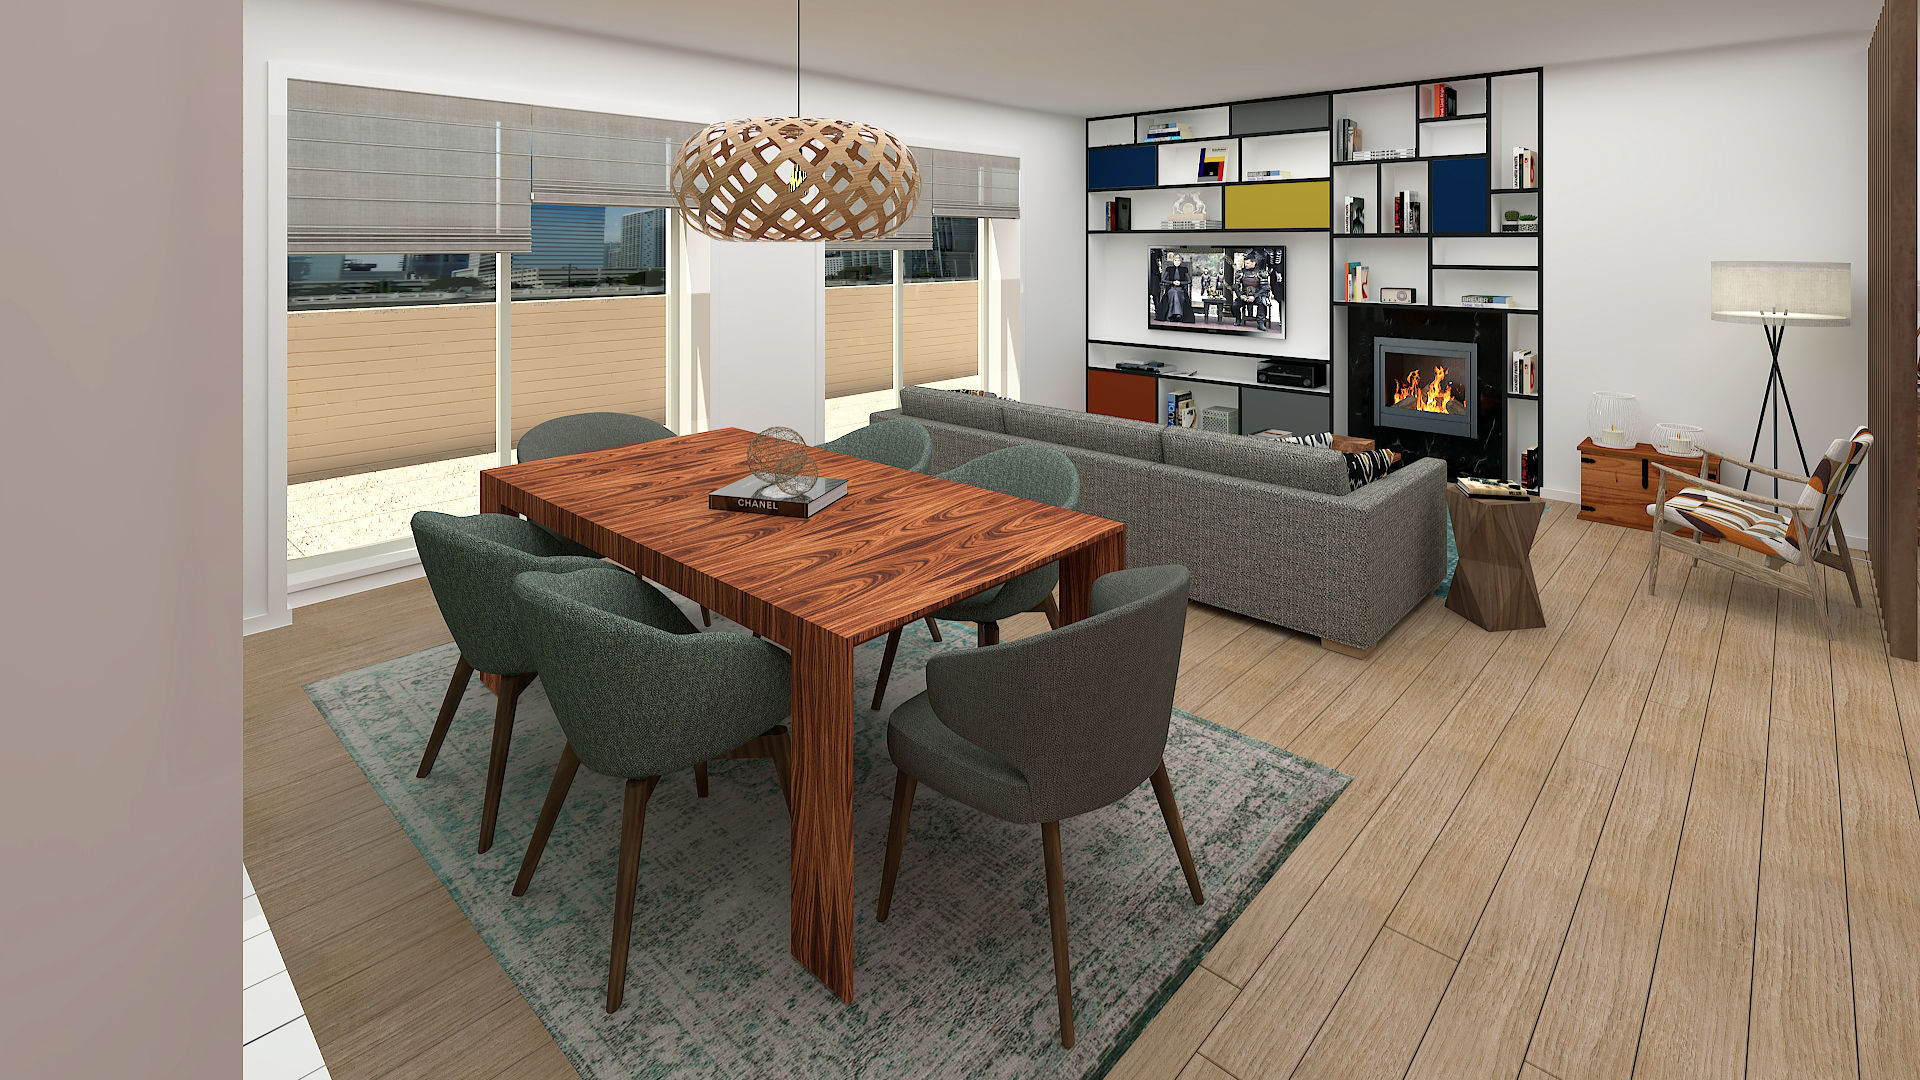 Dining room No Place Like Home ® Ruang Makan Modern dining room,living room,fireplace,ironwood,built-in-bookcase